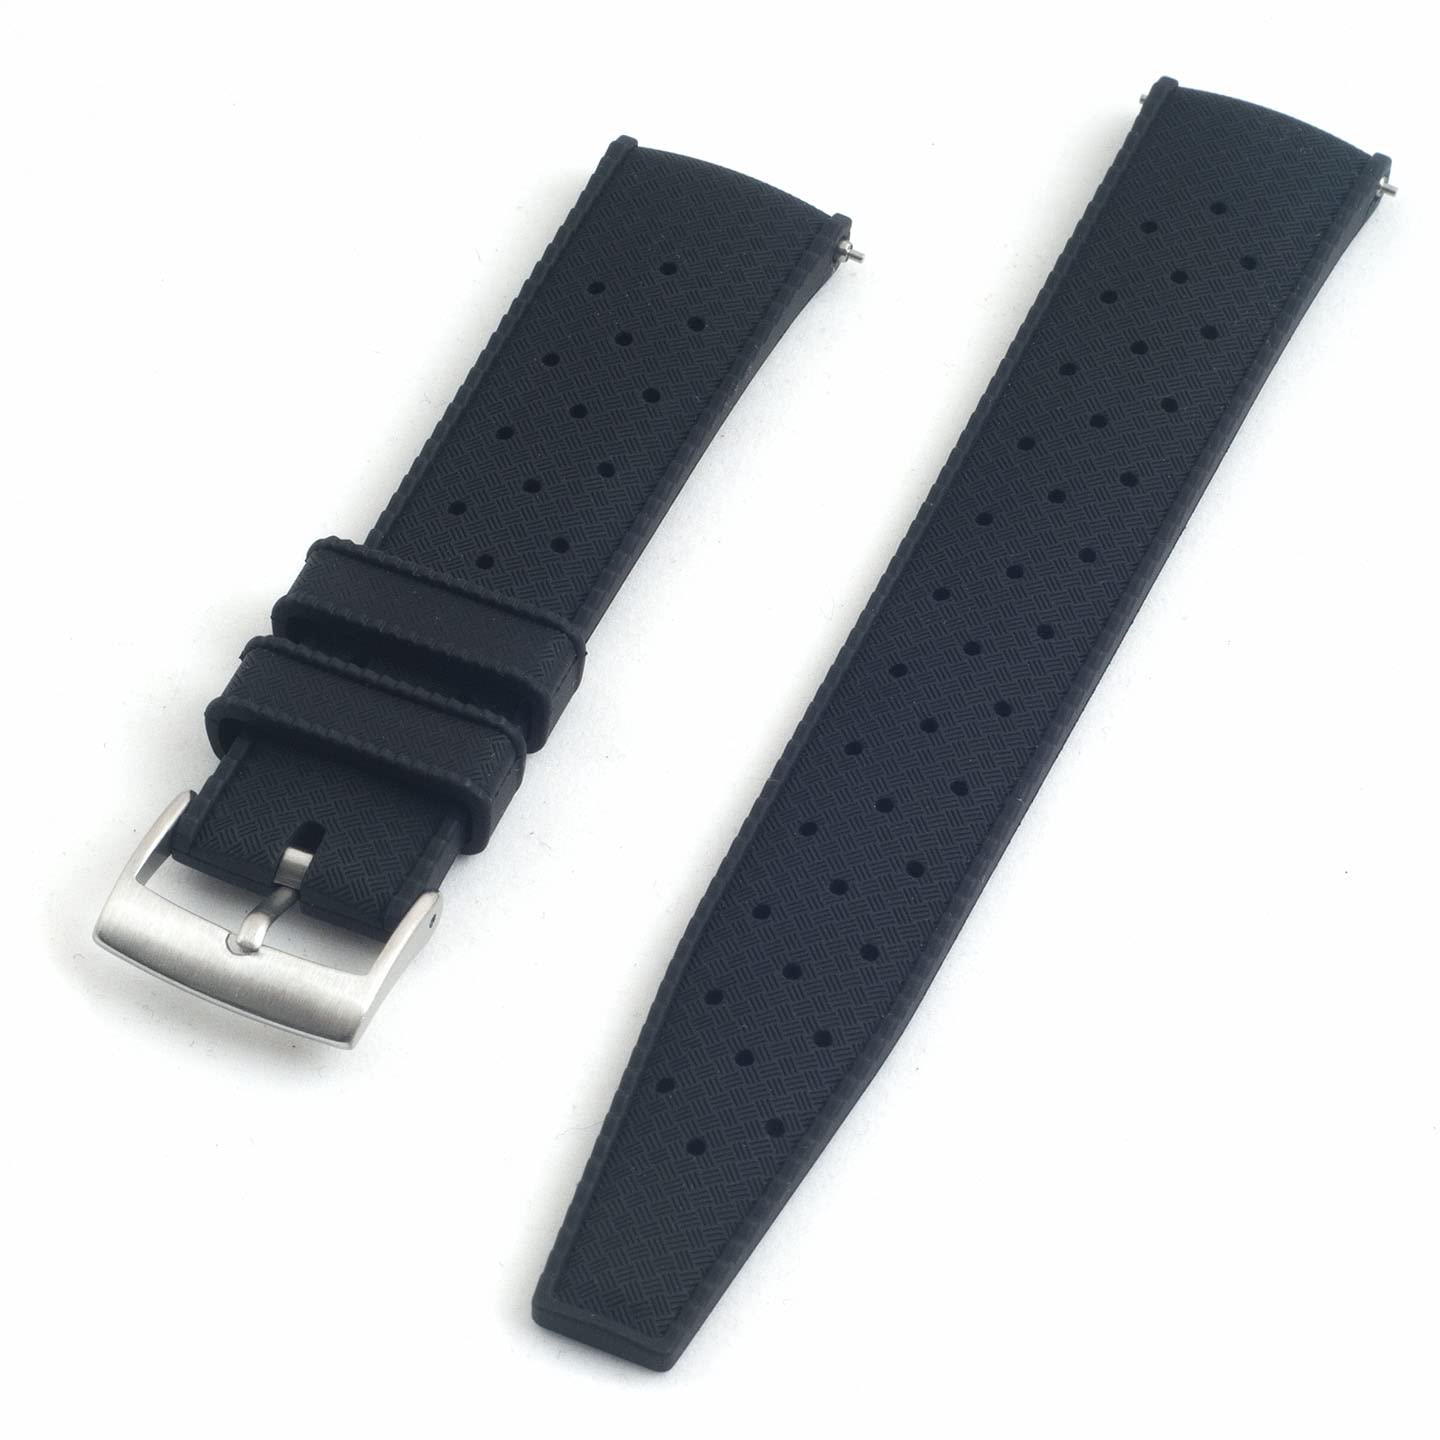 StrapHabit Quick Release Tropical Style FKM Rubber Watch Strap Band 18mm, 19mm, 20mm, 21mm, 22mm